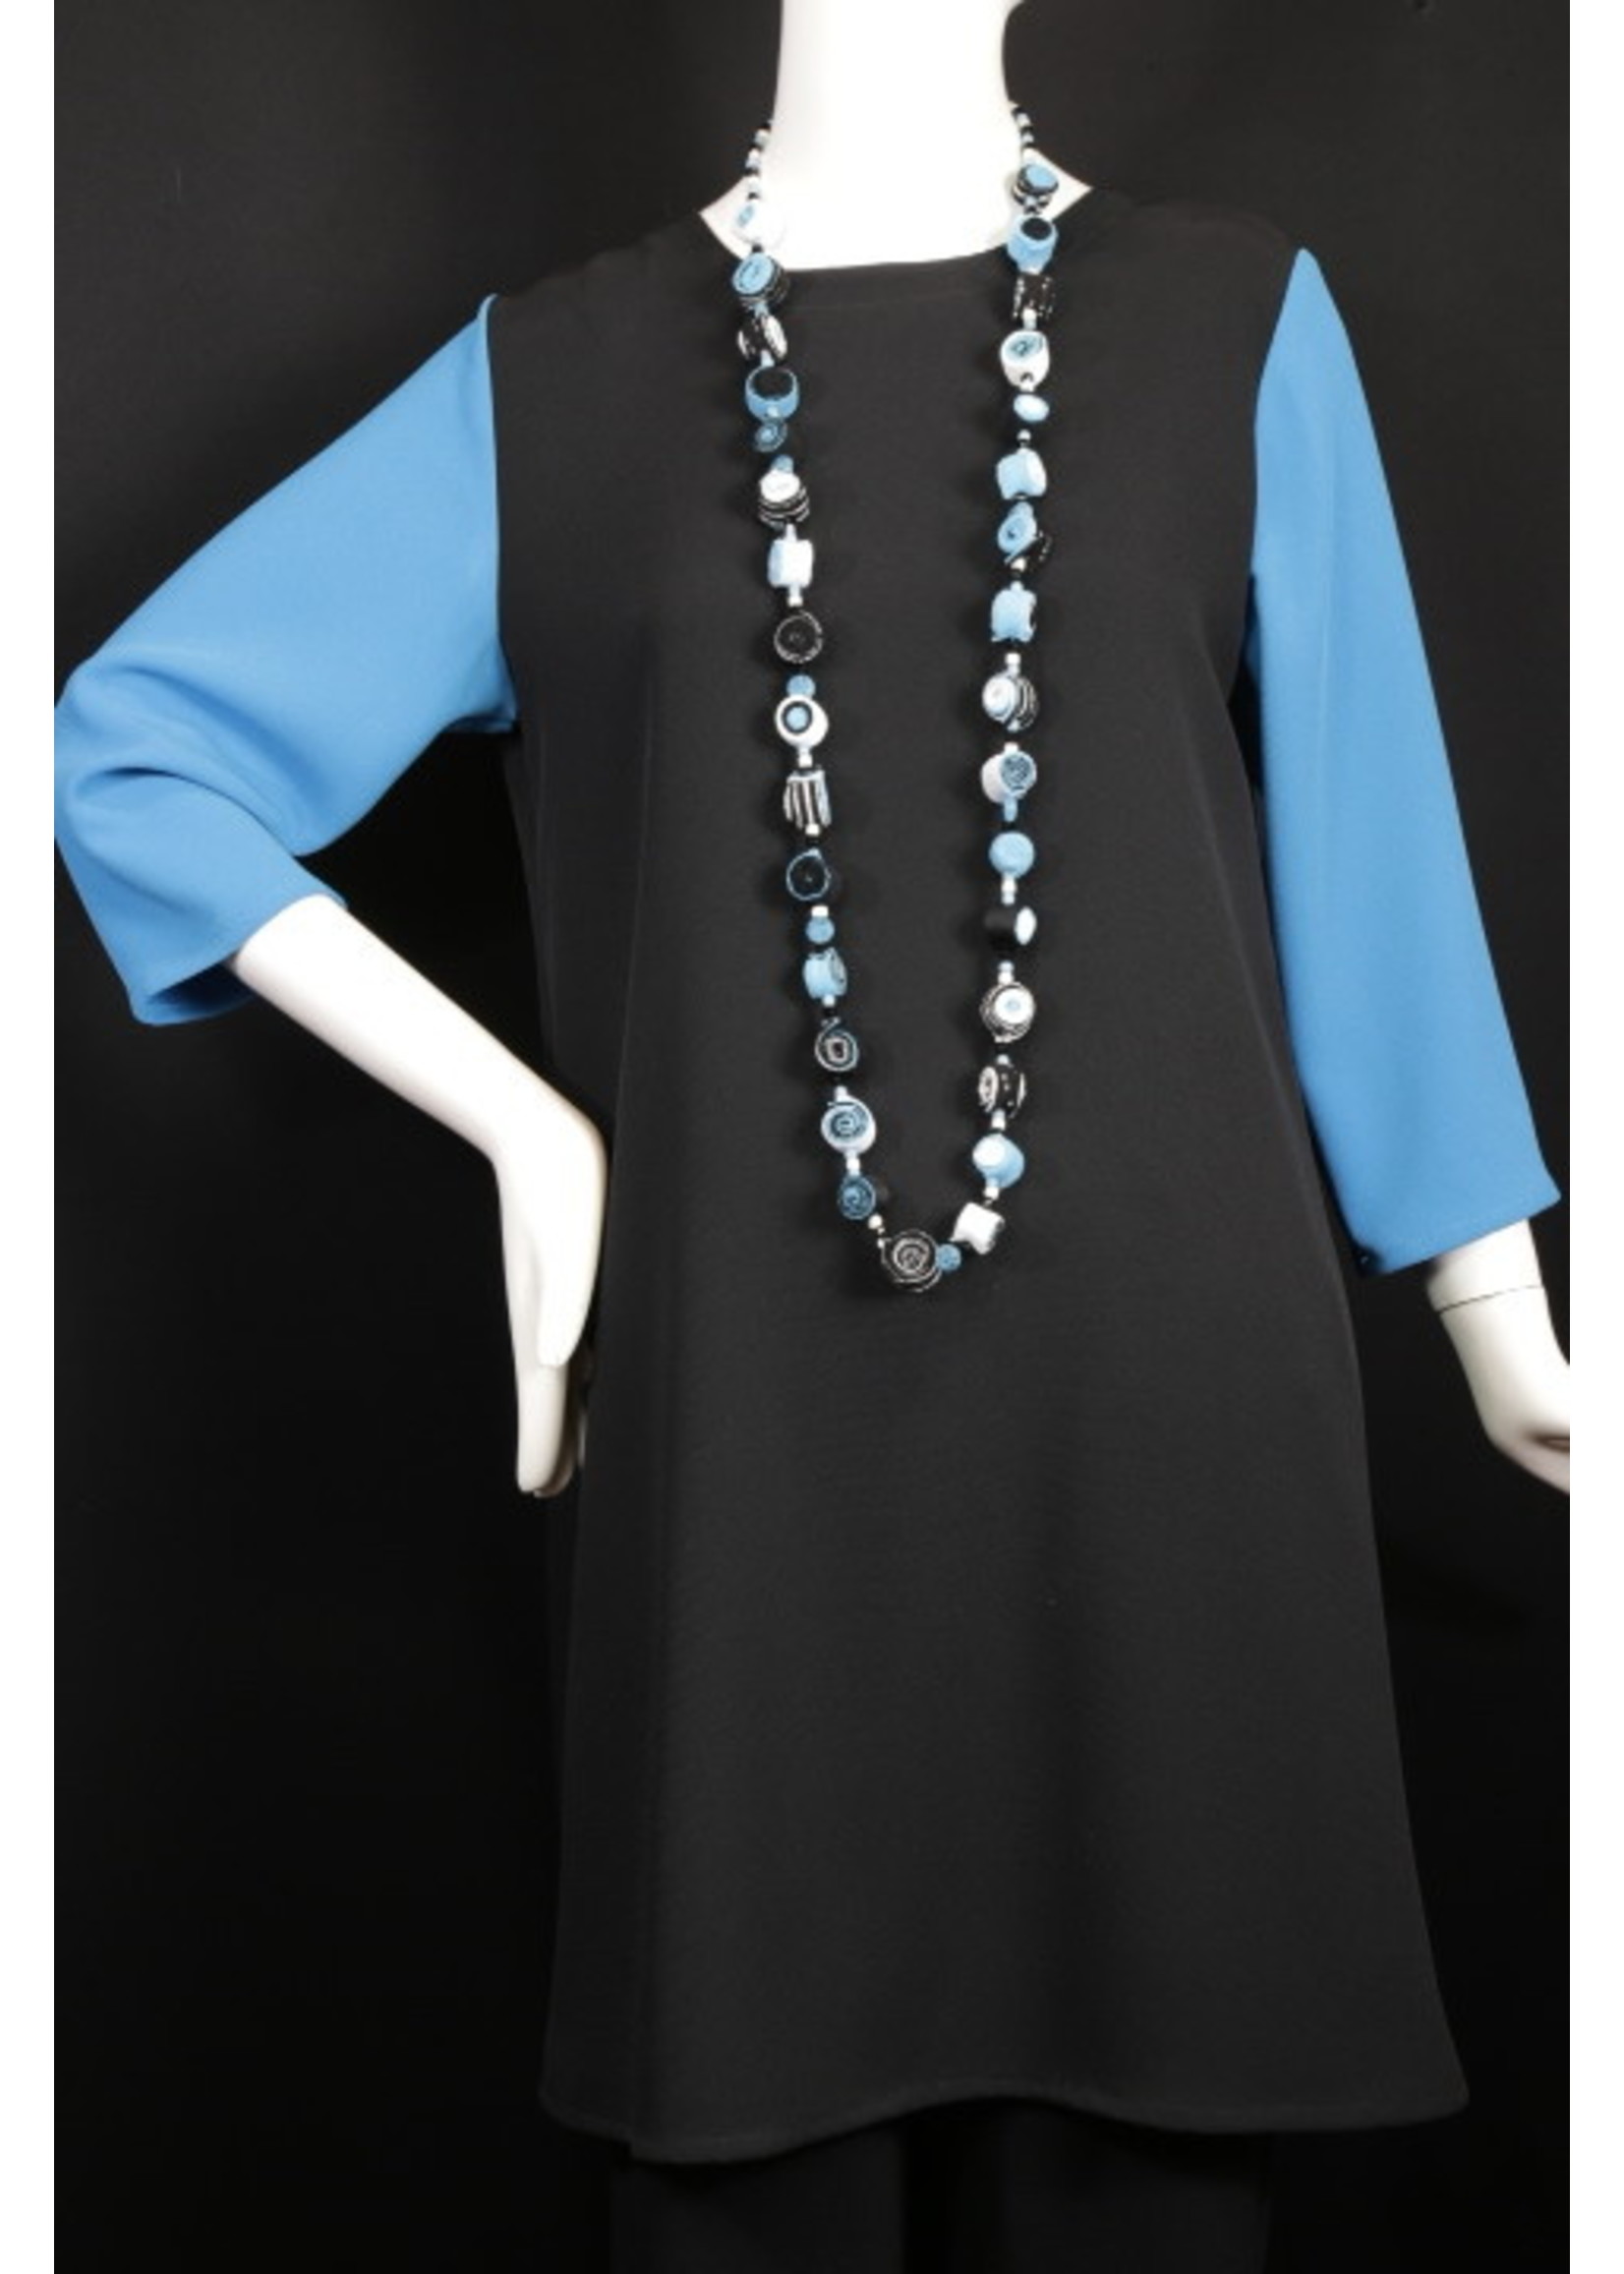 DC306-MS001/MS084-XP-Black and Peacock Swing Dress